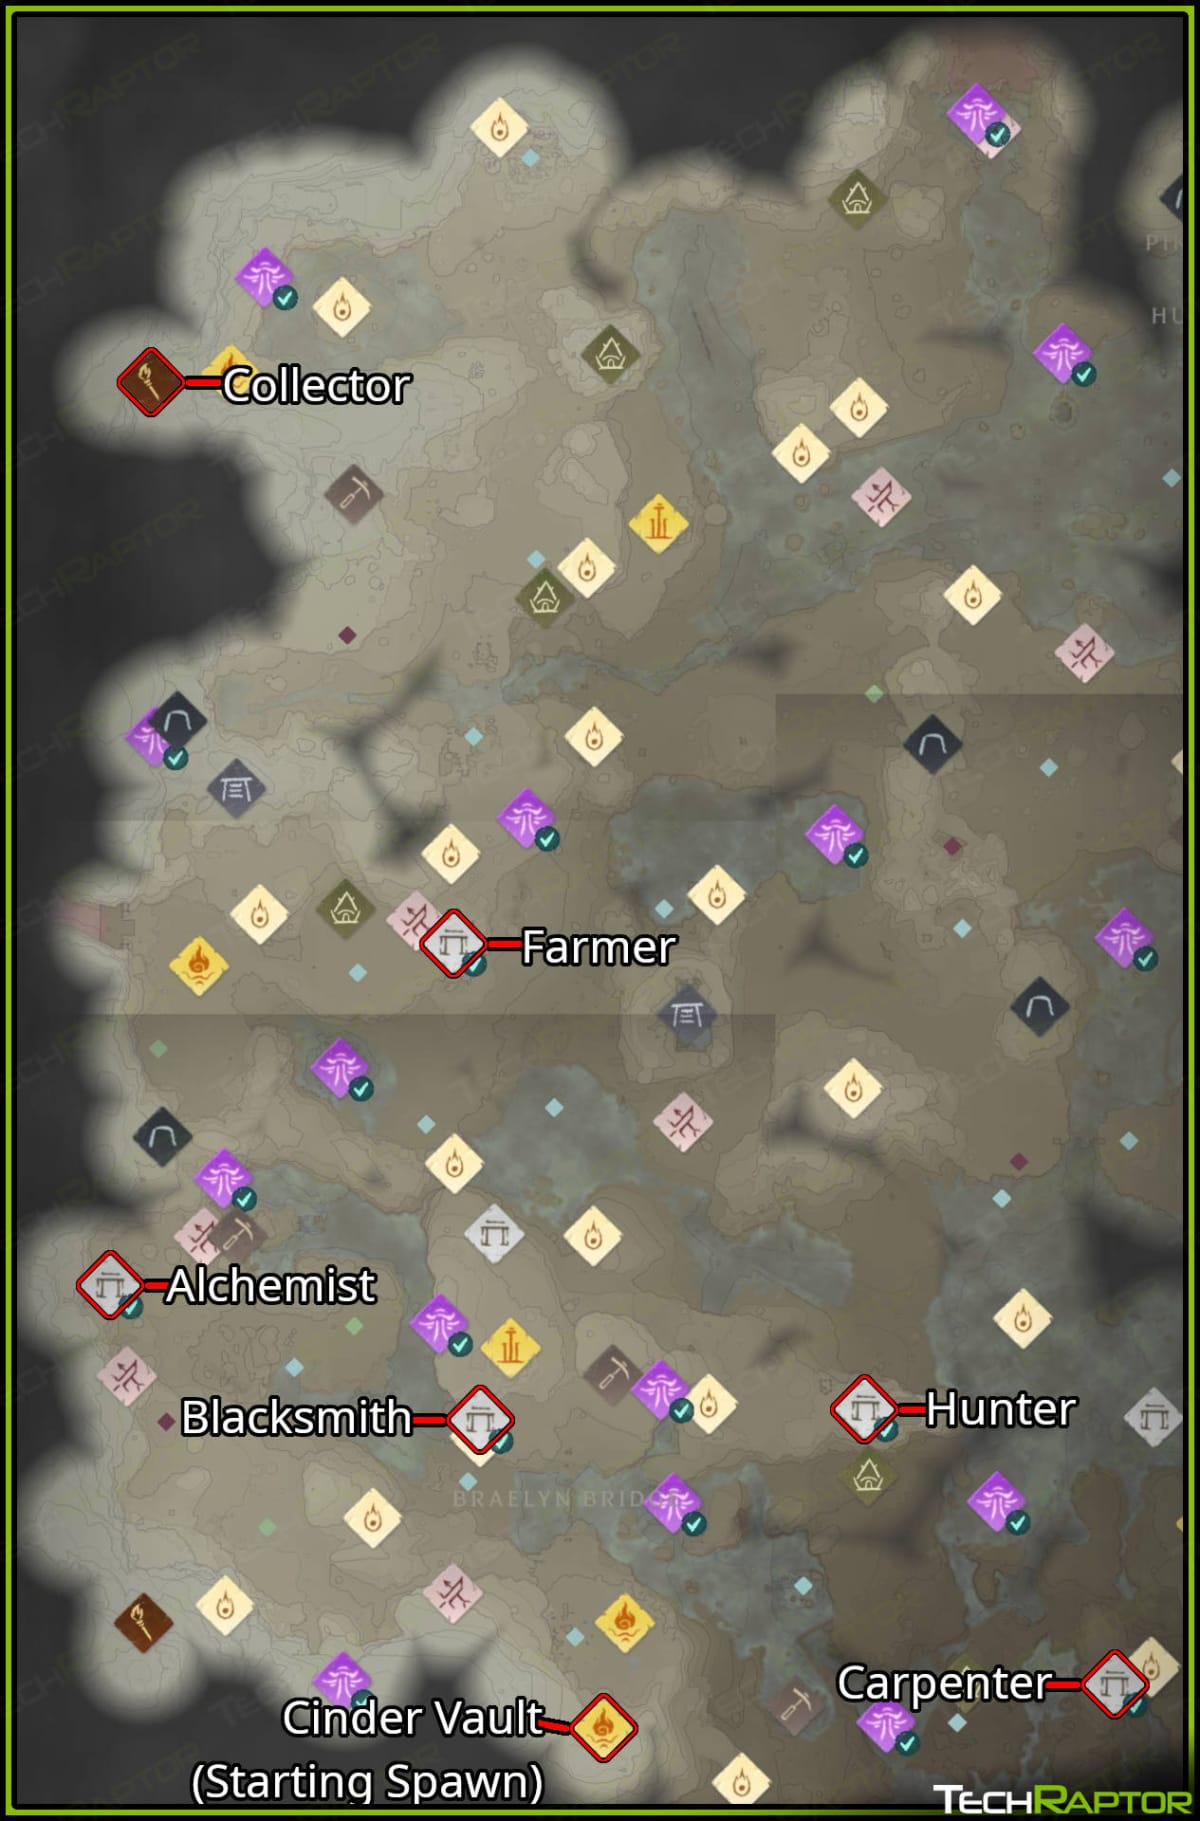 Enshrouded Map showing the location of all NPCs